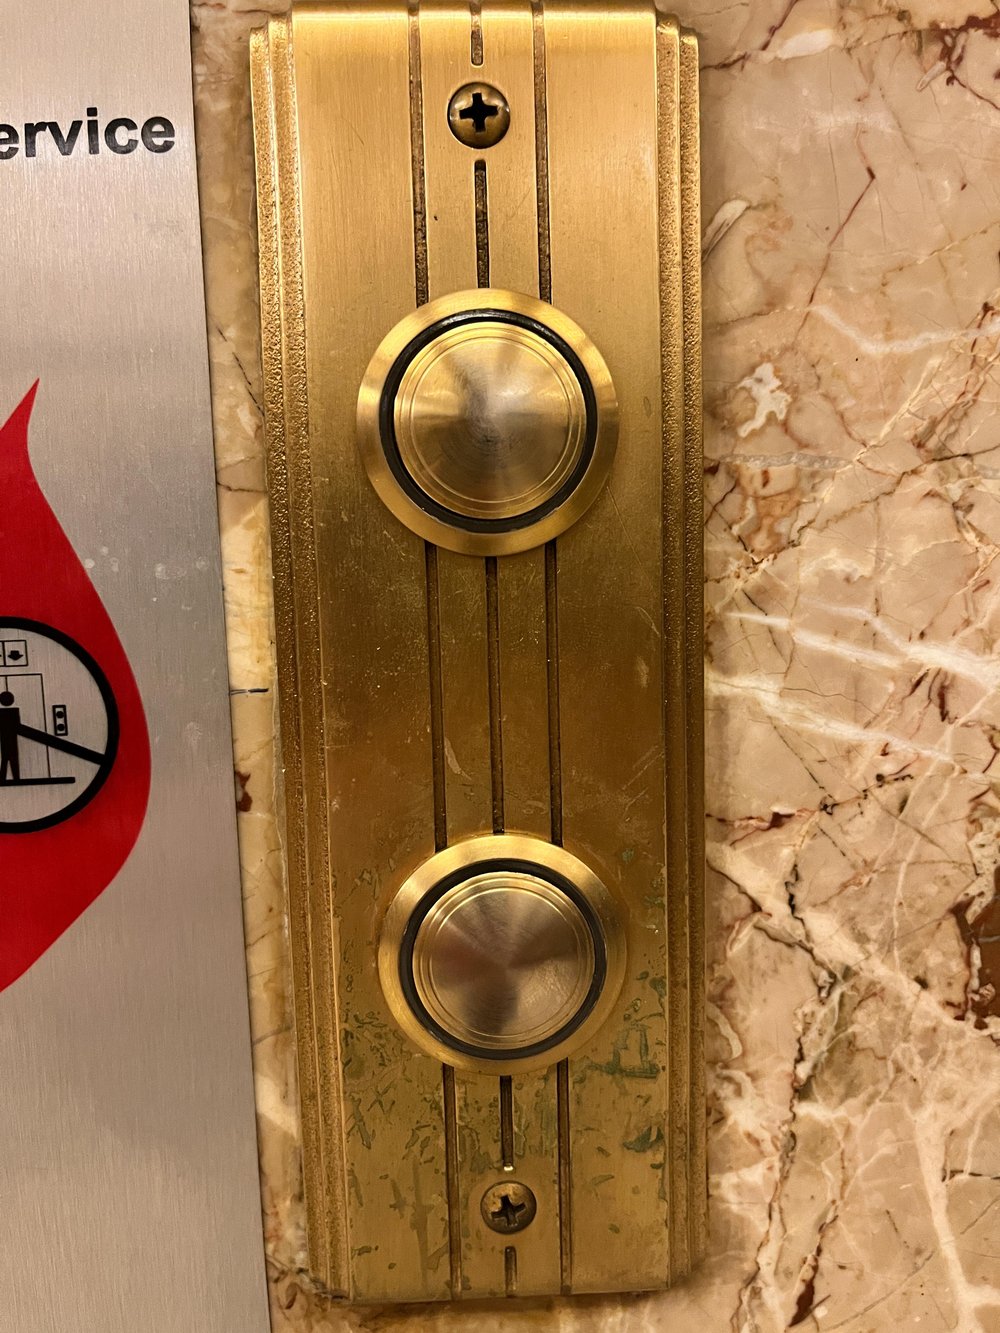 Elevator button with three bas relief lines